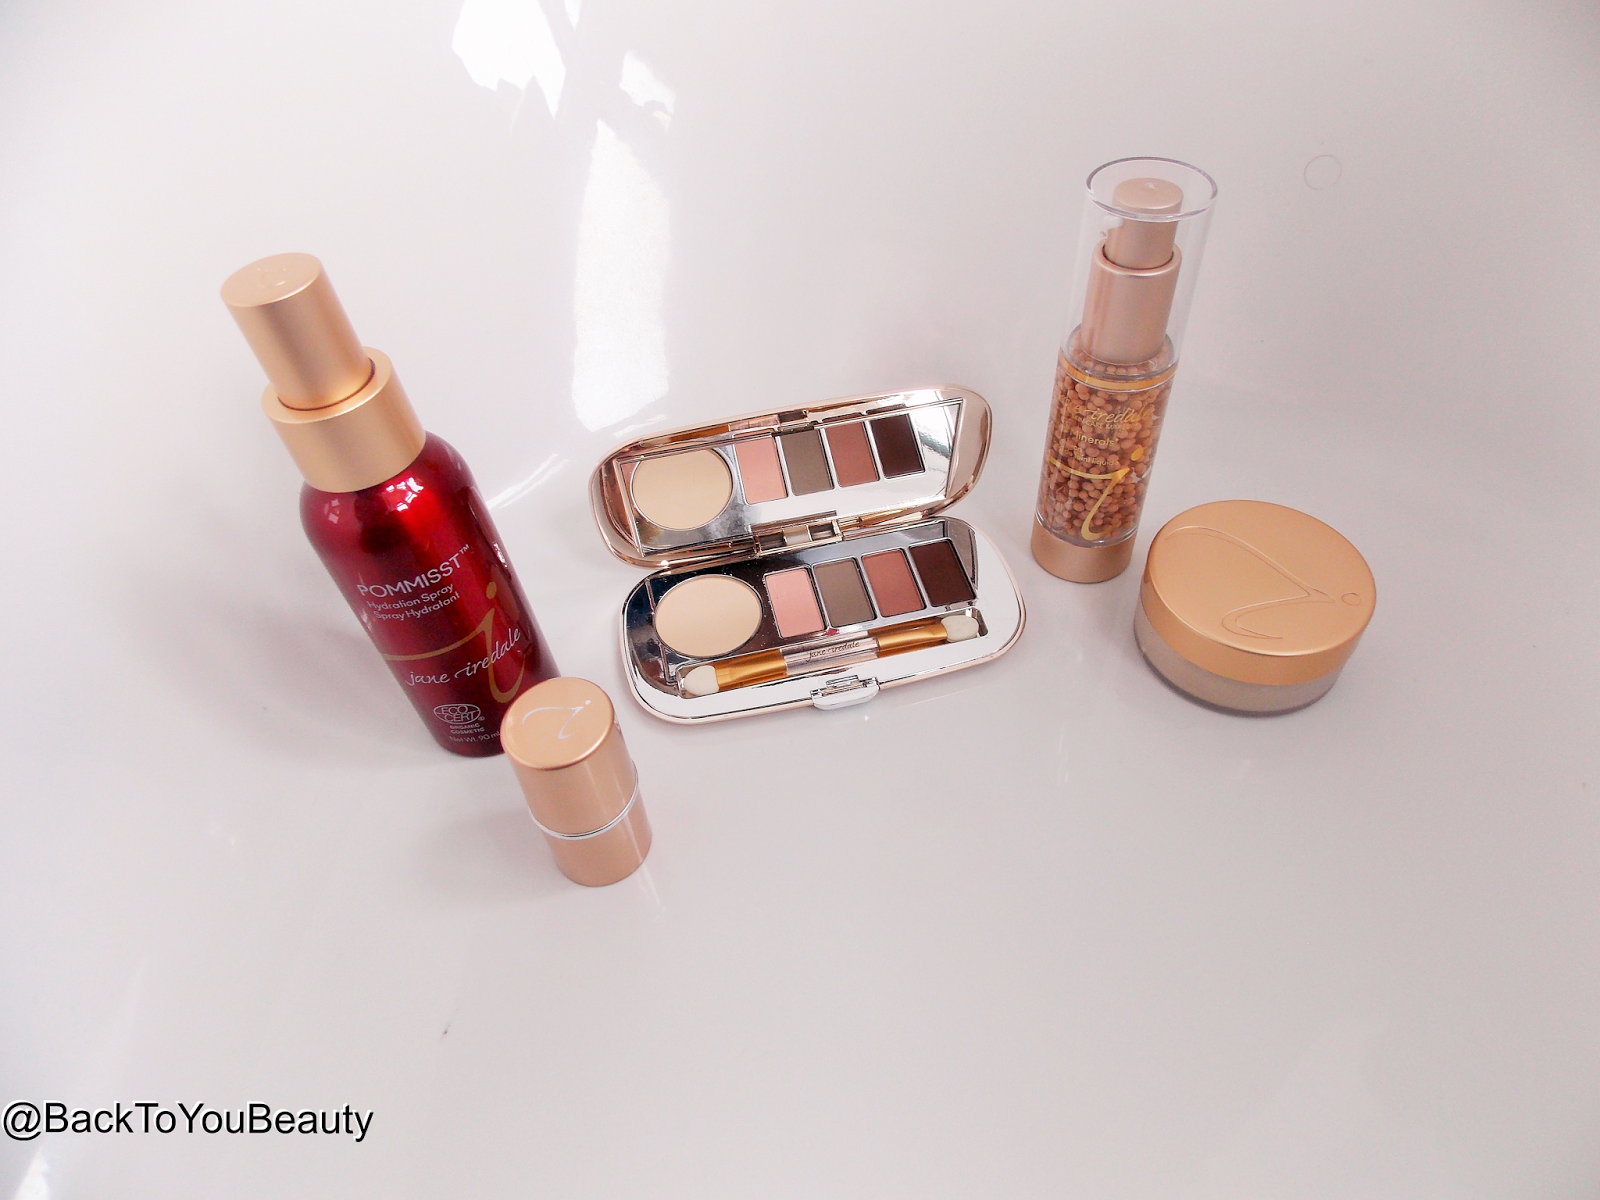 Jane Iredale mineral make up collection - The perfect ...